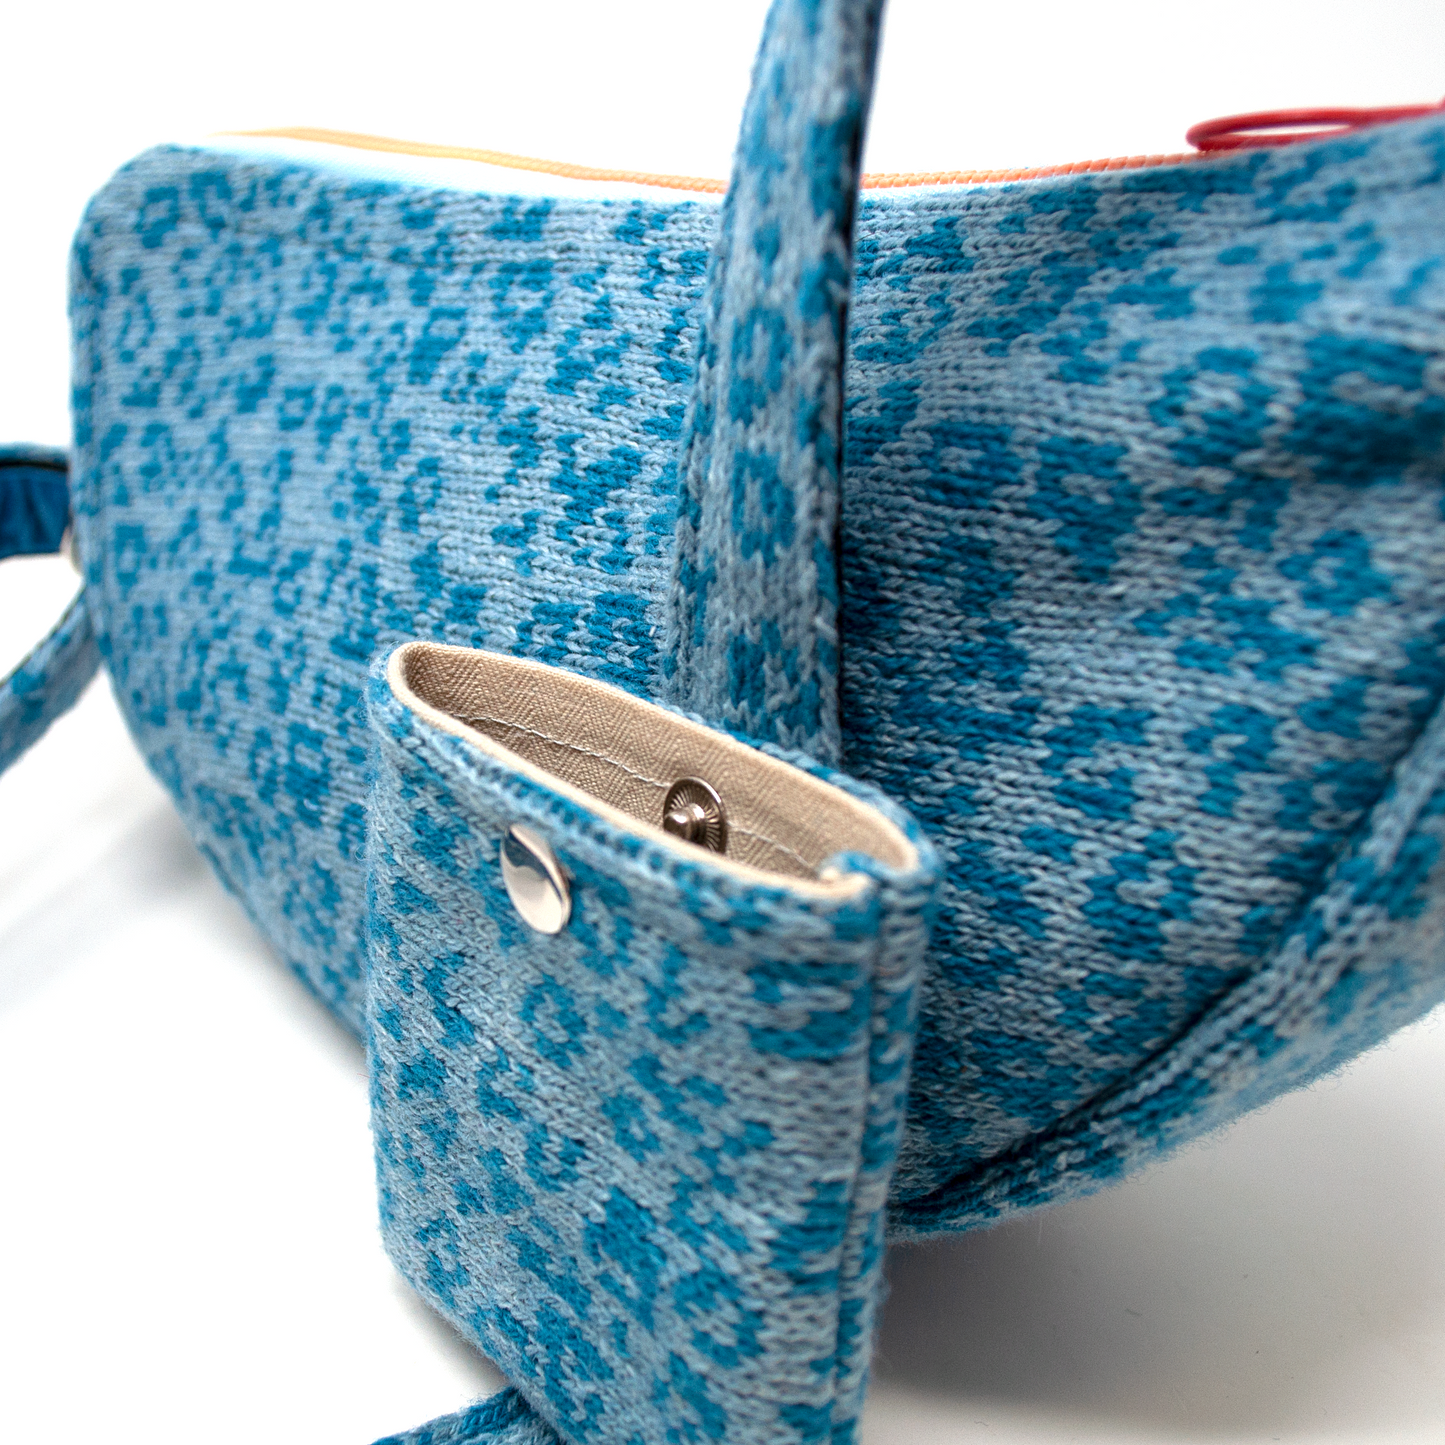 Porcelain & Turquoise - SS23 Collection - Cross Body Bag